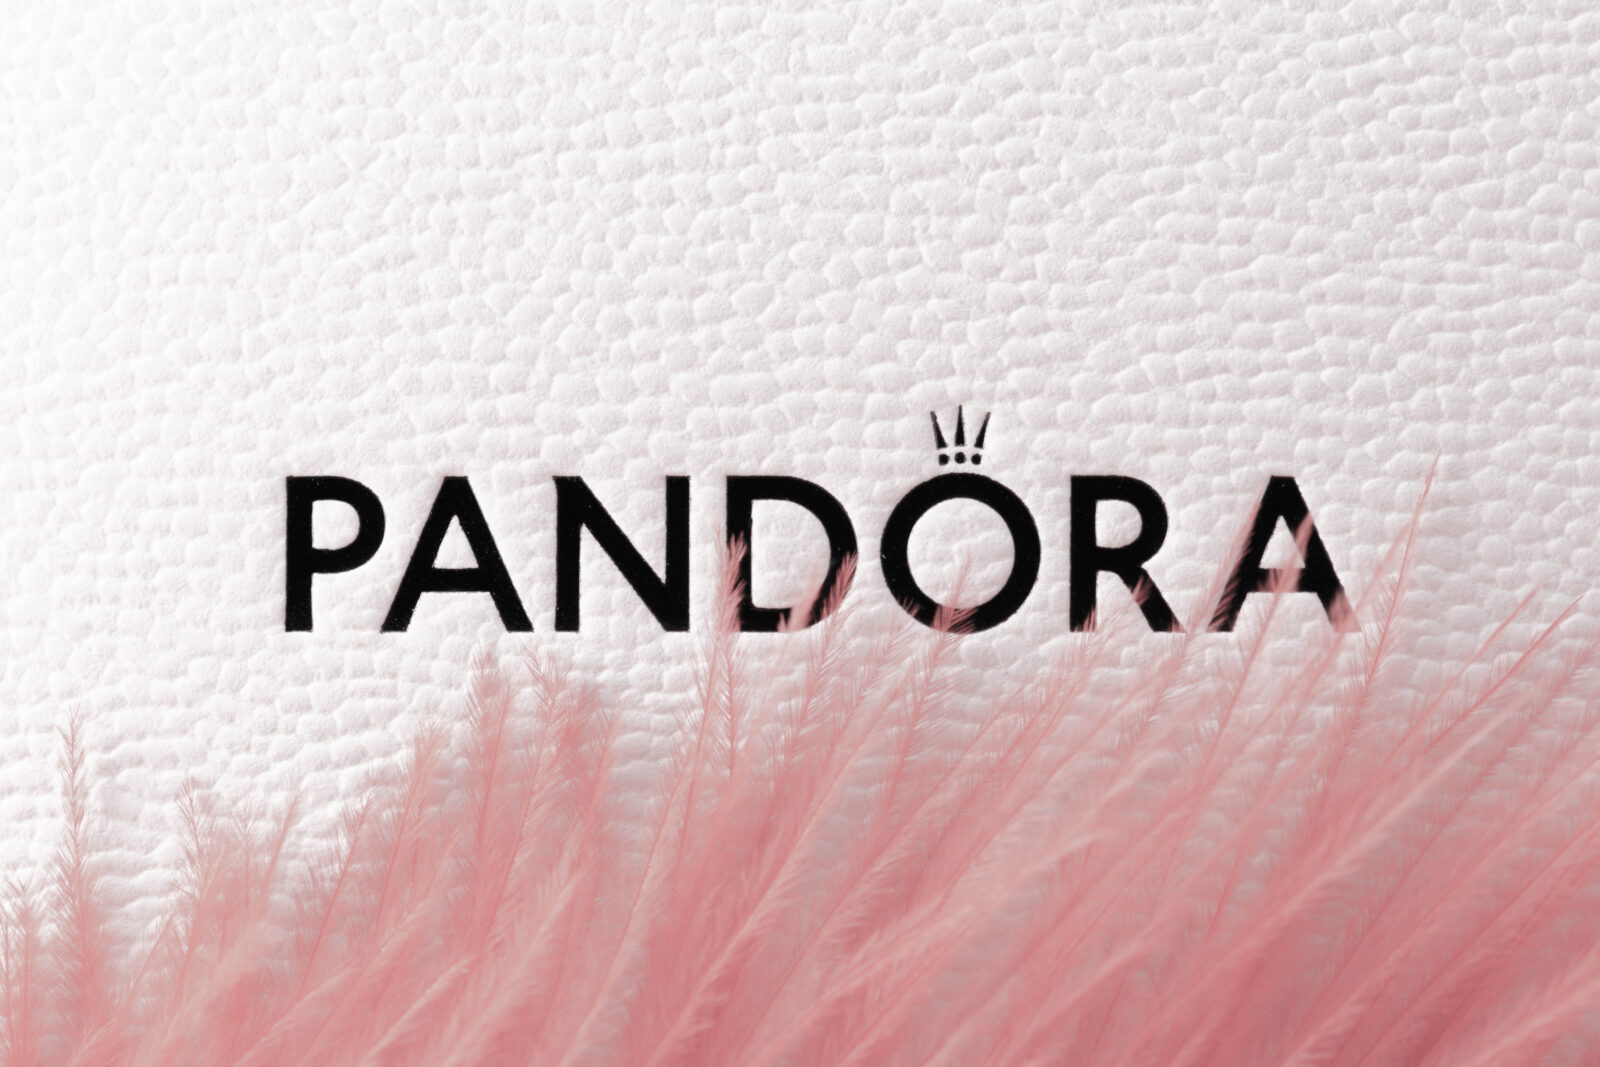 London UK 27.09.2021 Pandora logo brand and text sign for jewellery company. 2023/09/AdobeStock_459732372_Editorial_Use_Only.jpeg 